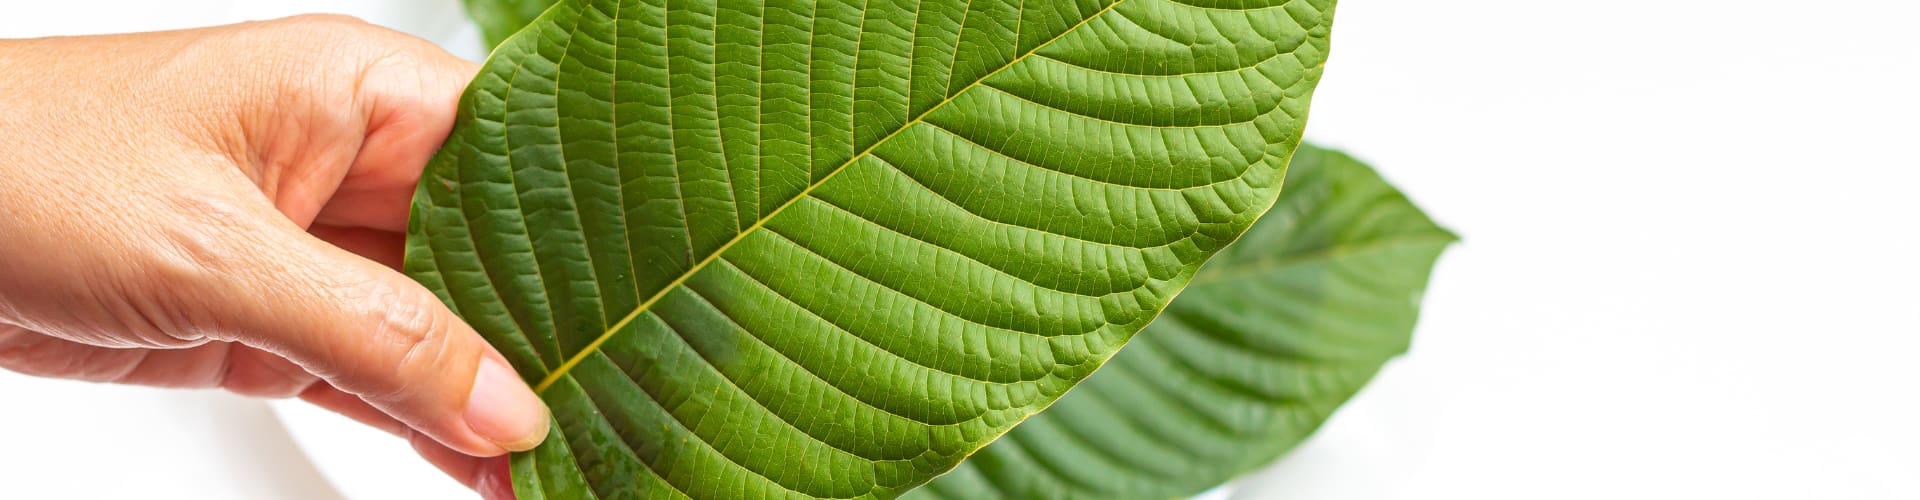 What’s The Deal With White Elephant Kratom? Common Myths and Misconceptions